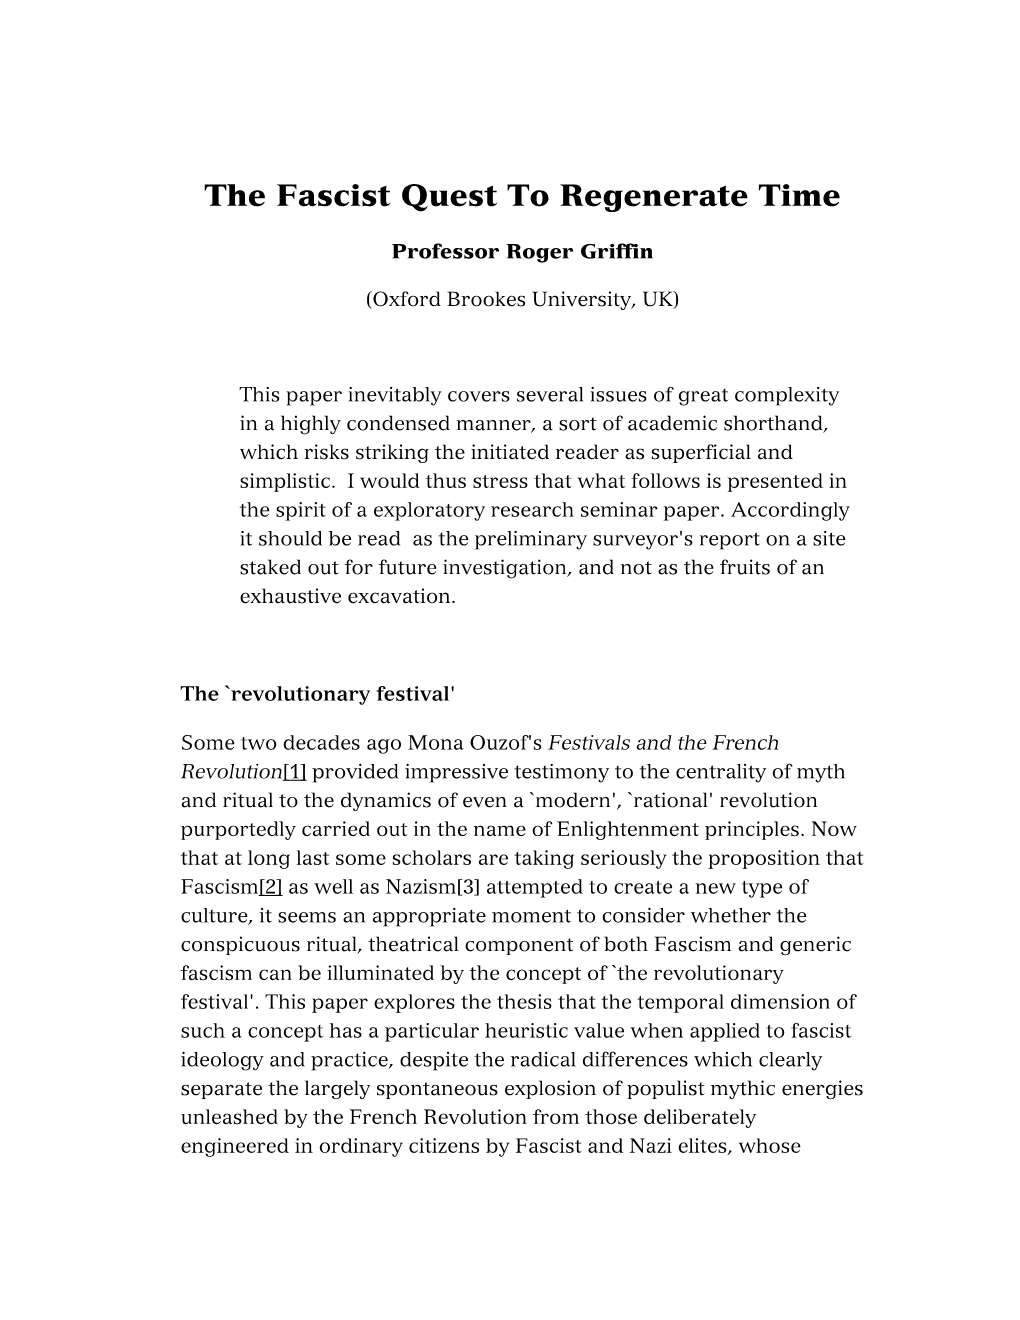 The Fascist Quest to Regenerate Time